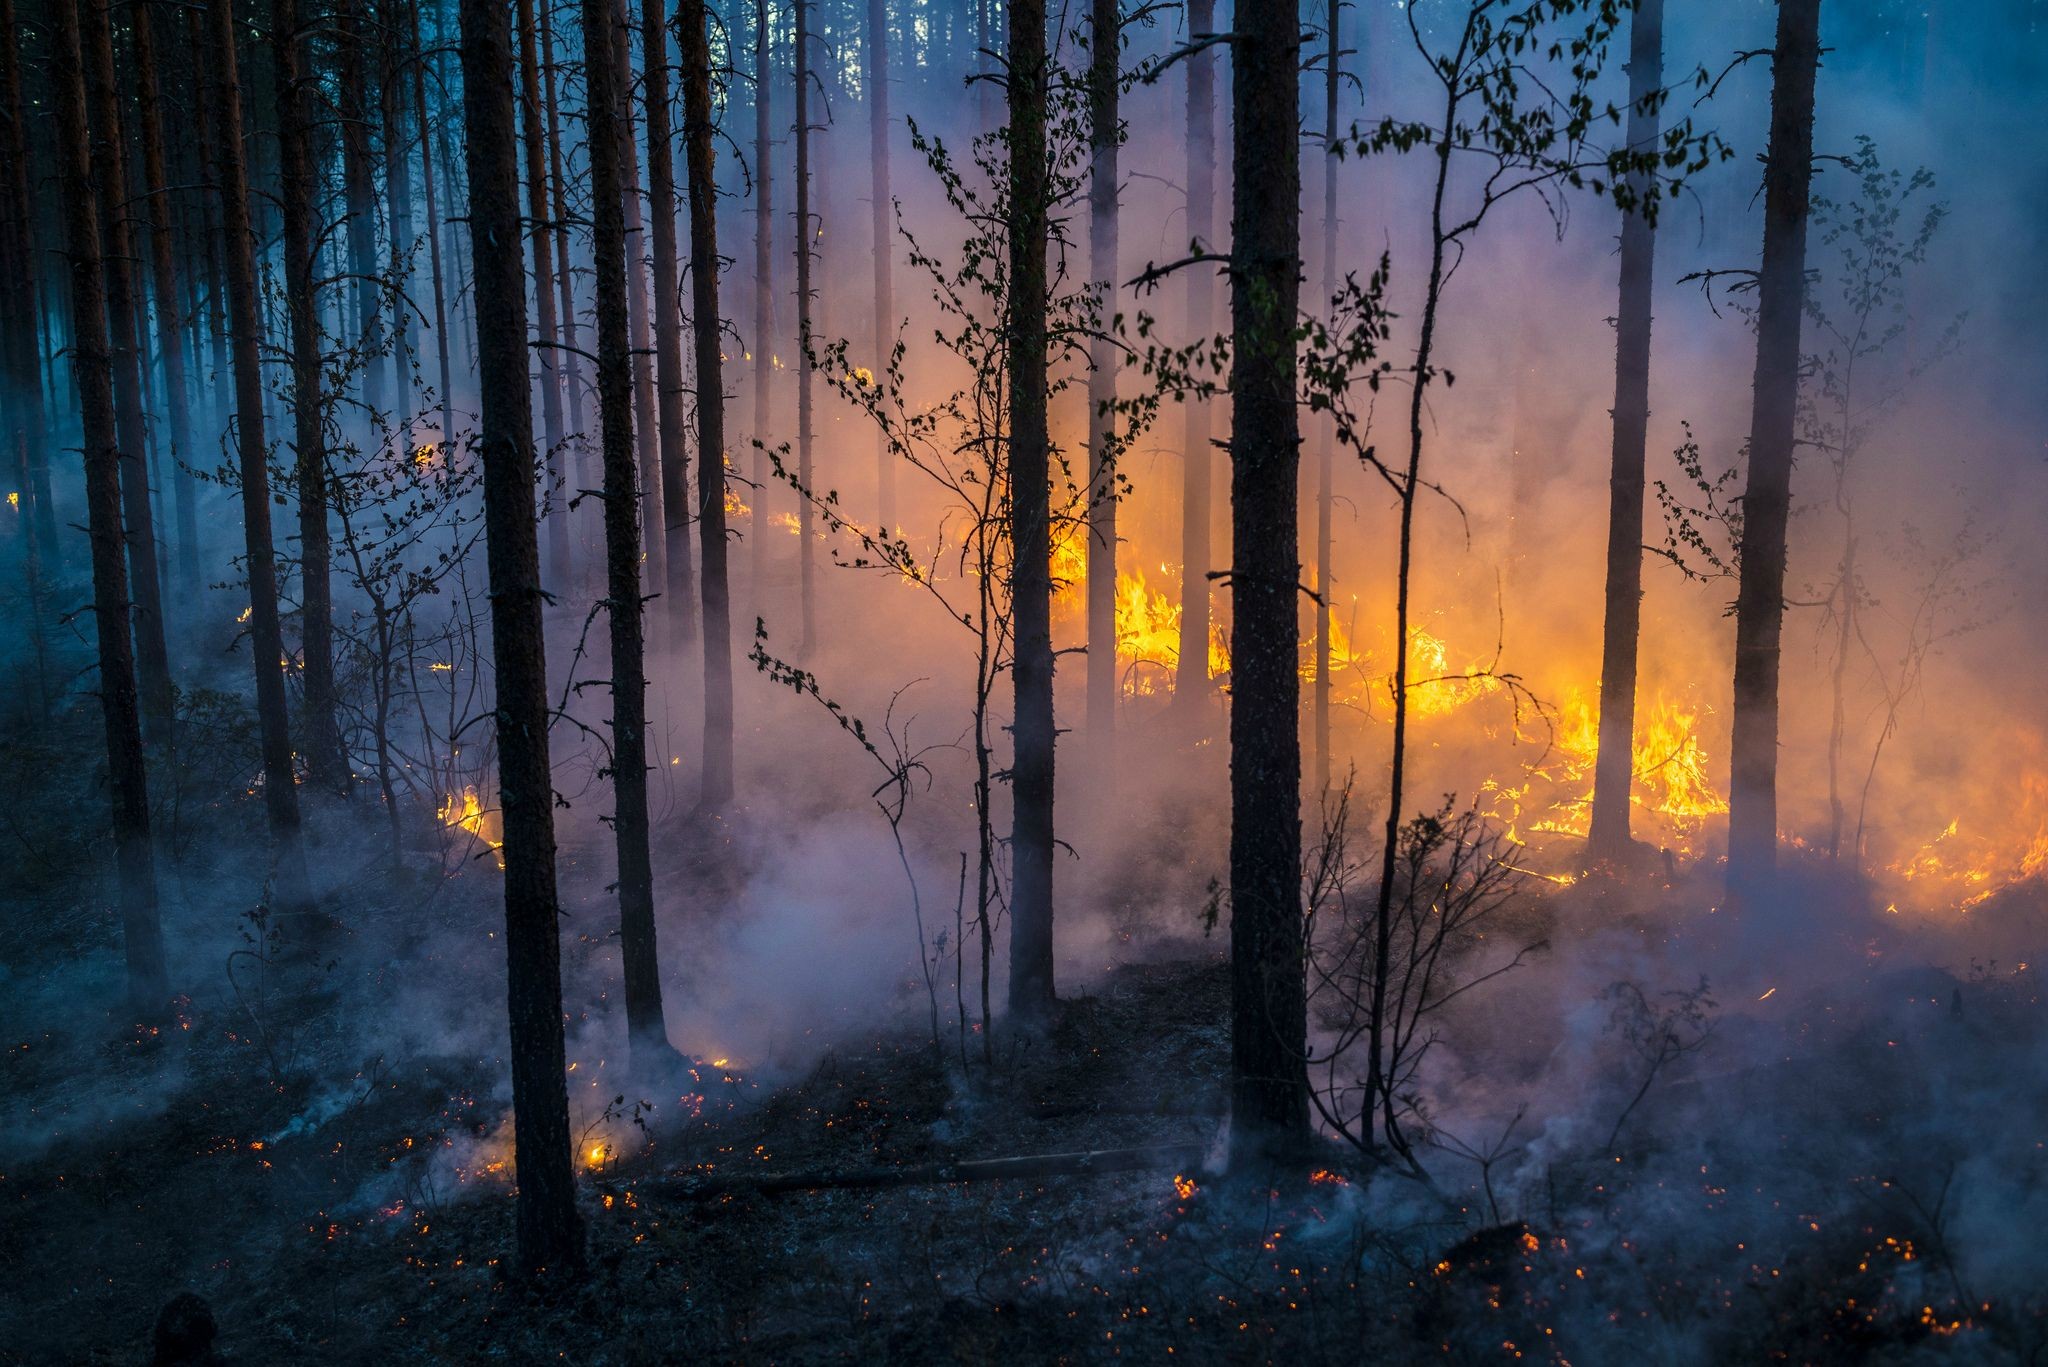 General 2048x1367 nature fire trees outdoors burning